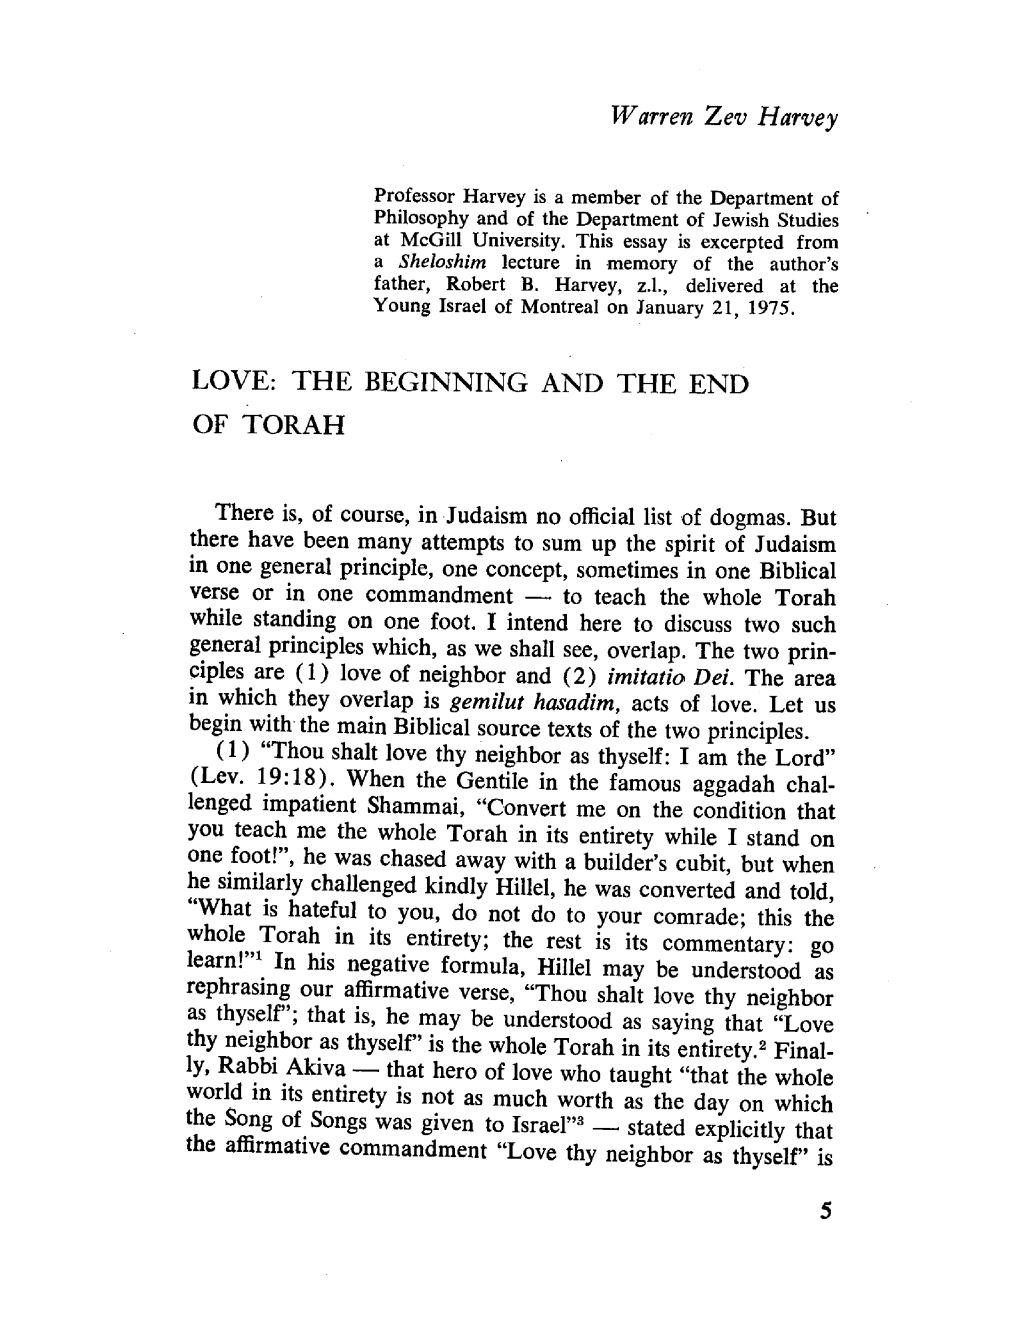 Love: the Beginning and the End of Torah